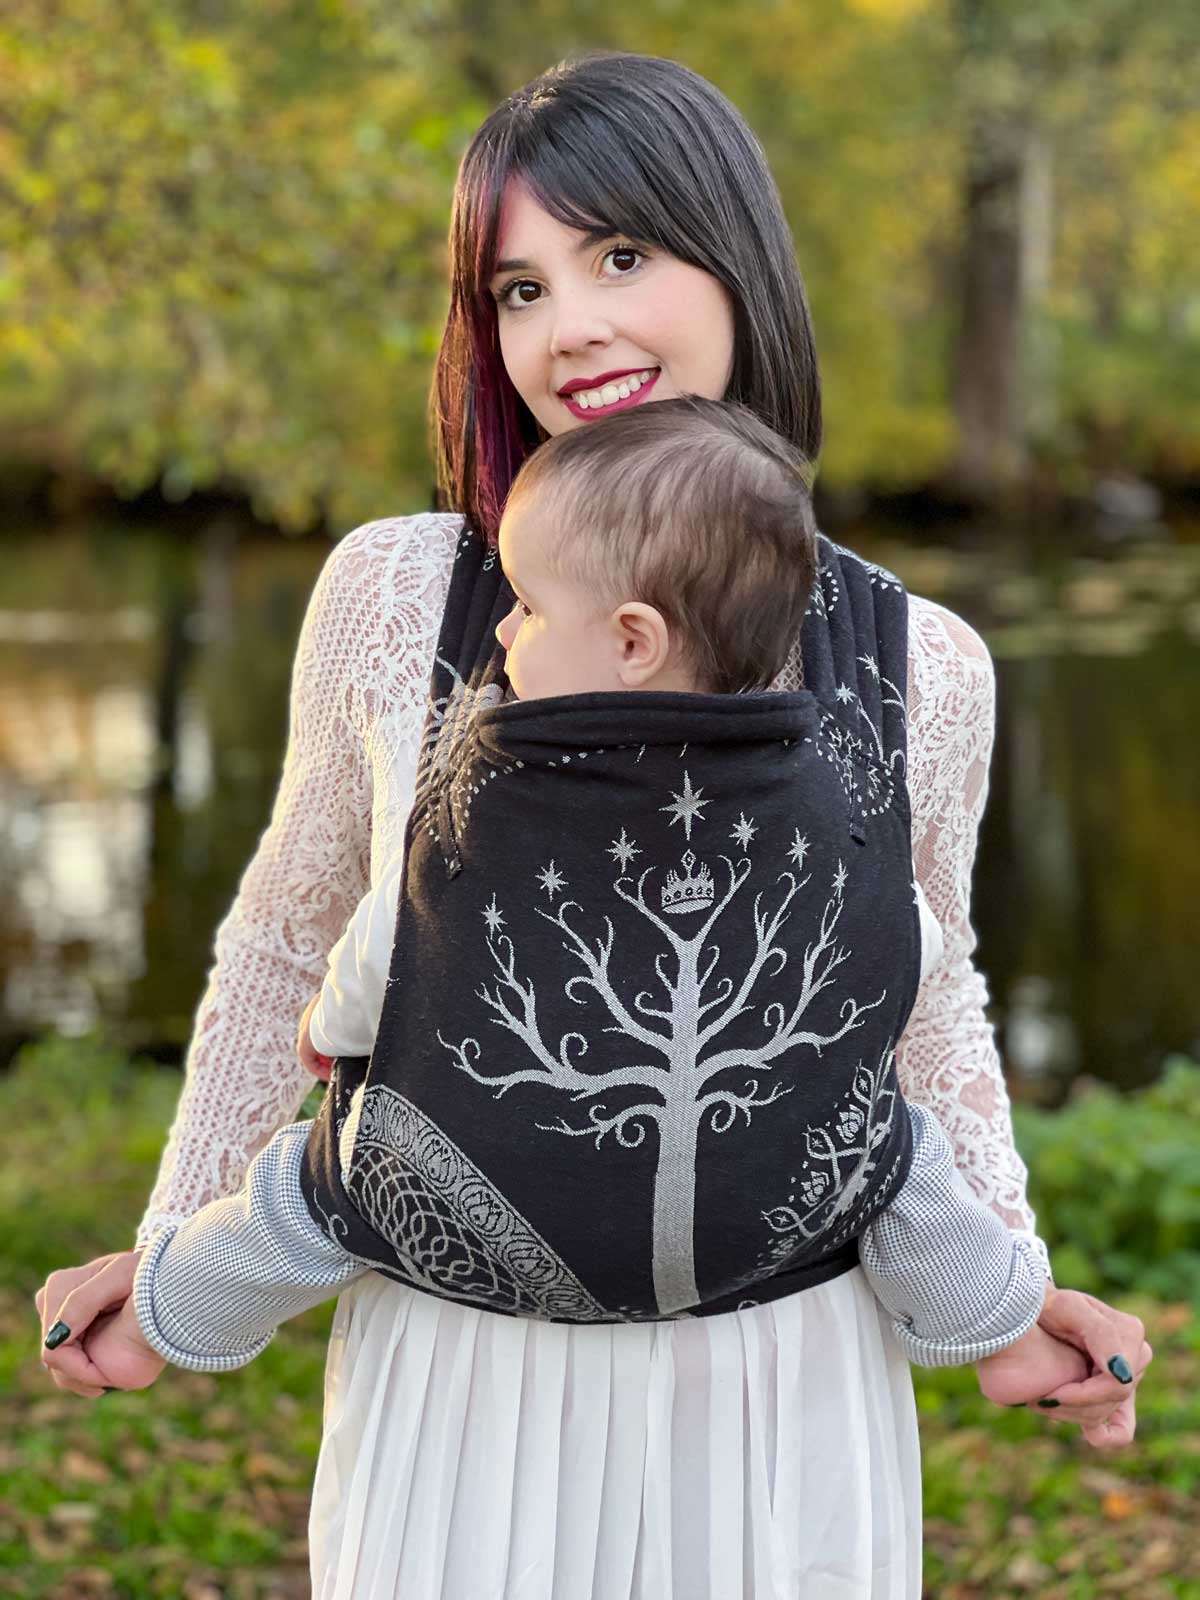 The Lord of the Rings Baby Carrier